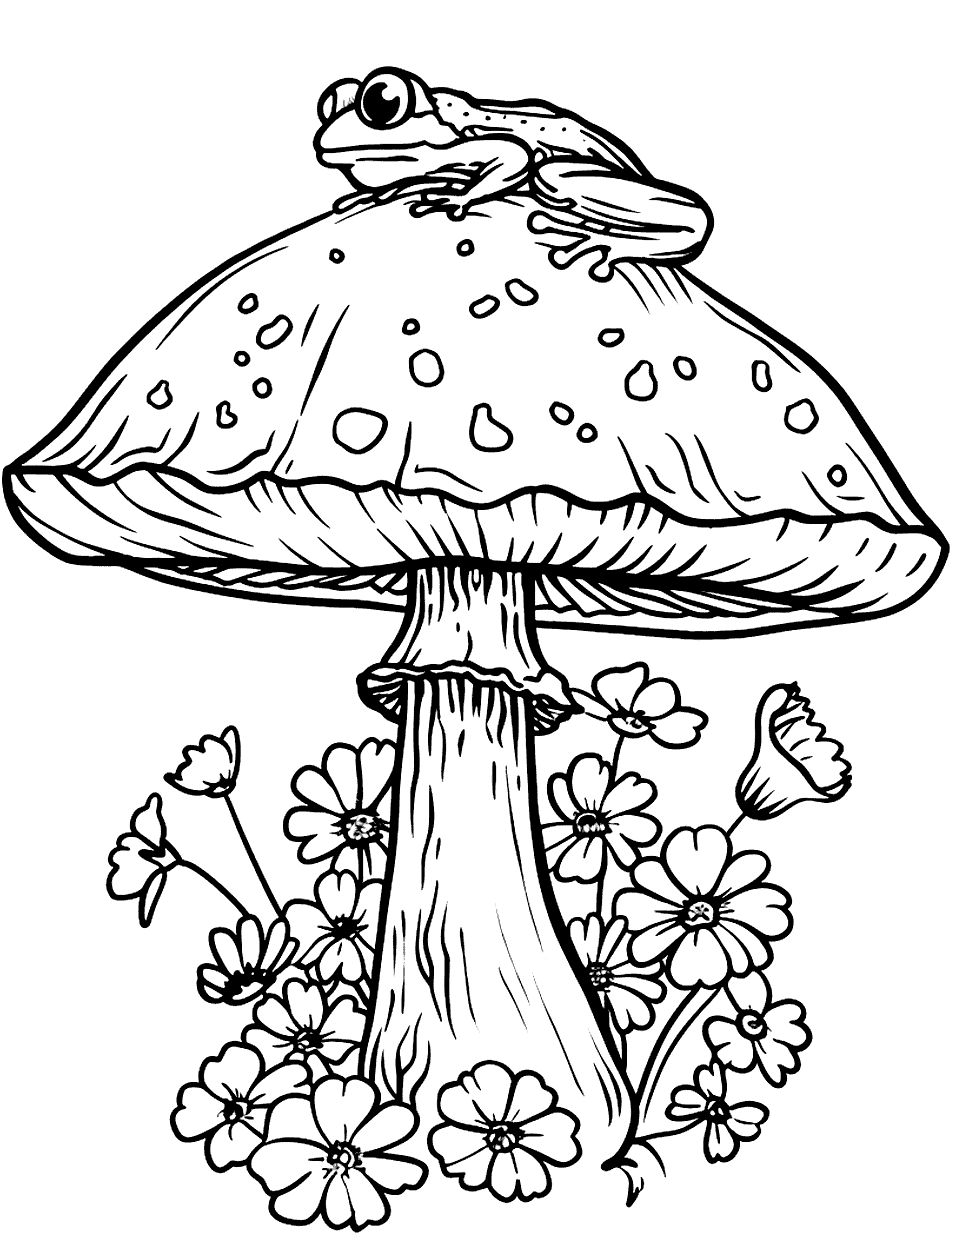 Frog Sitting on a Mushroom Coloring Page - A frog perches atop a large mushroom, surrounded by small flowers.